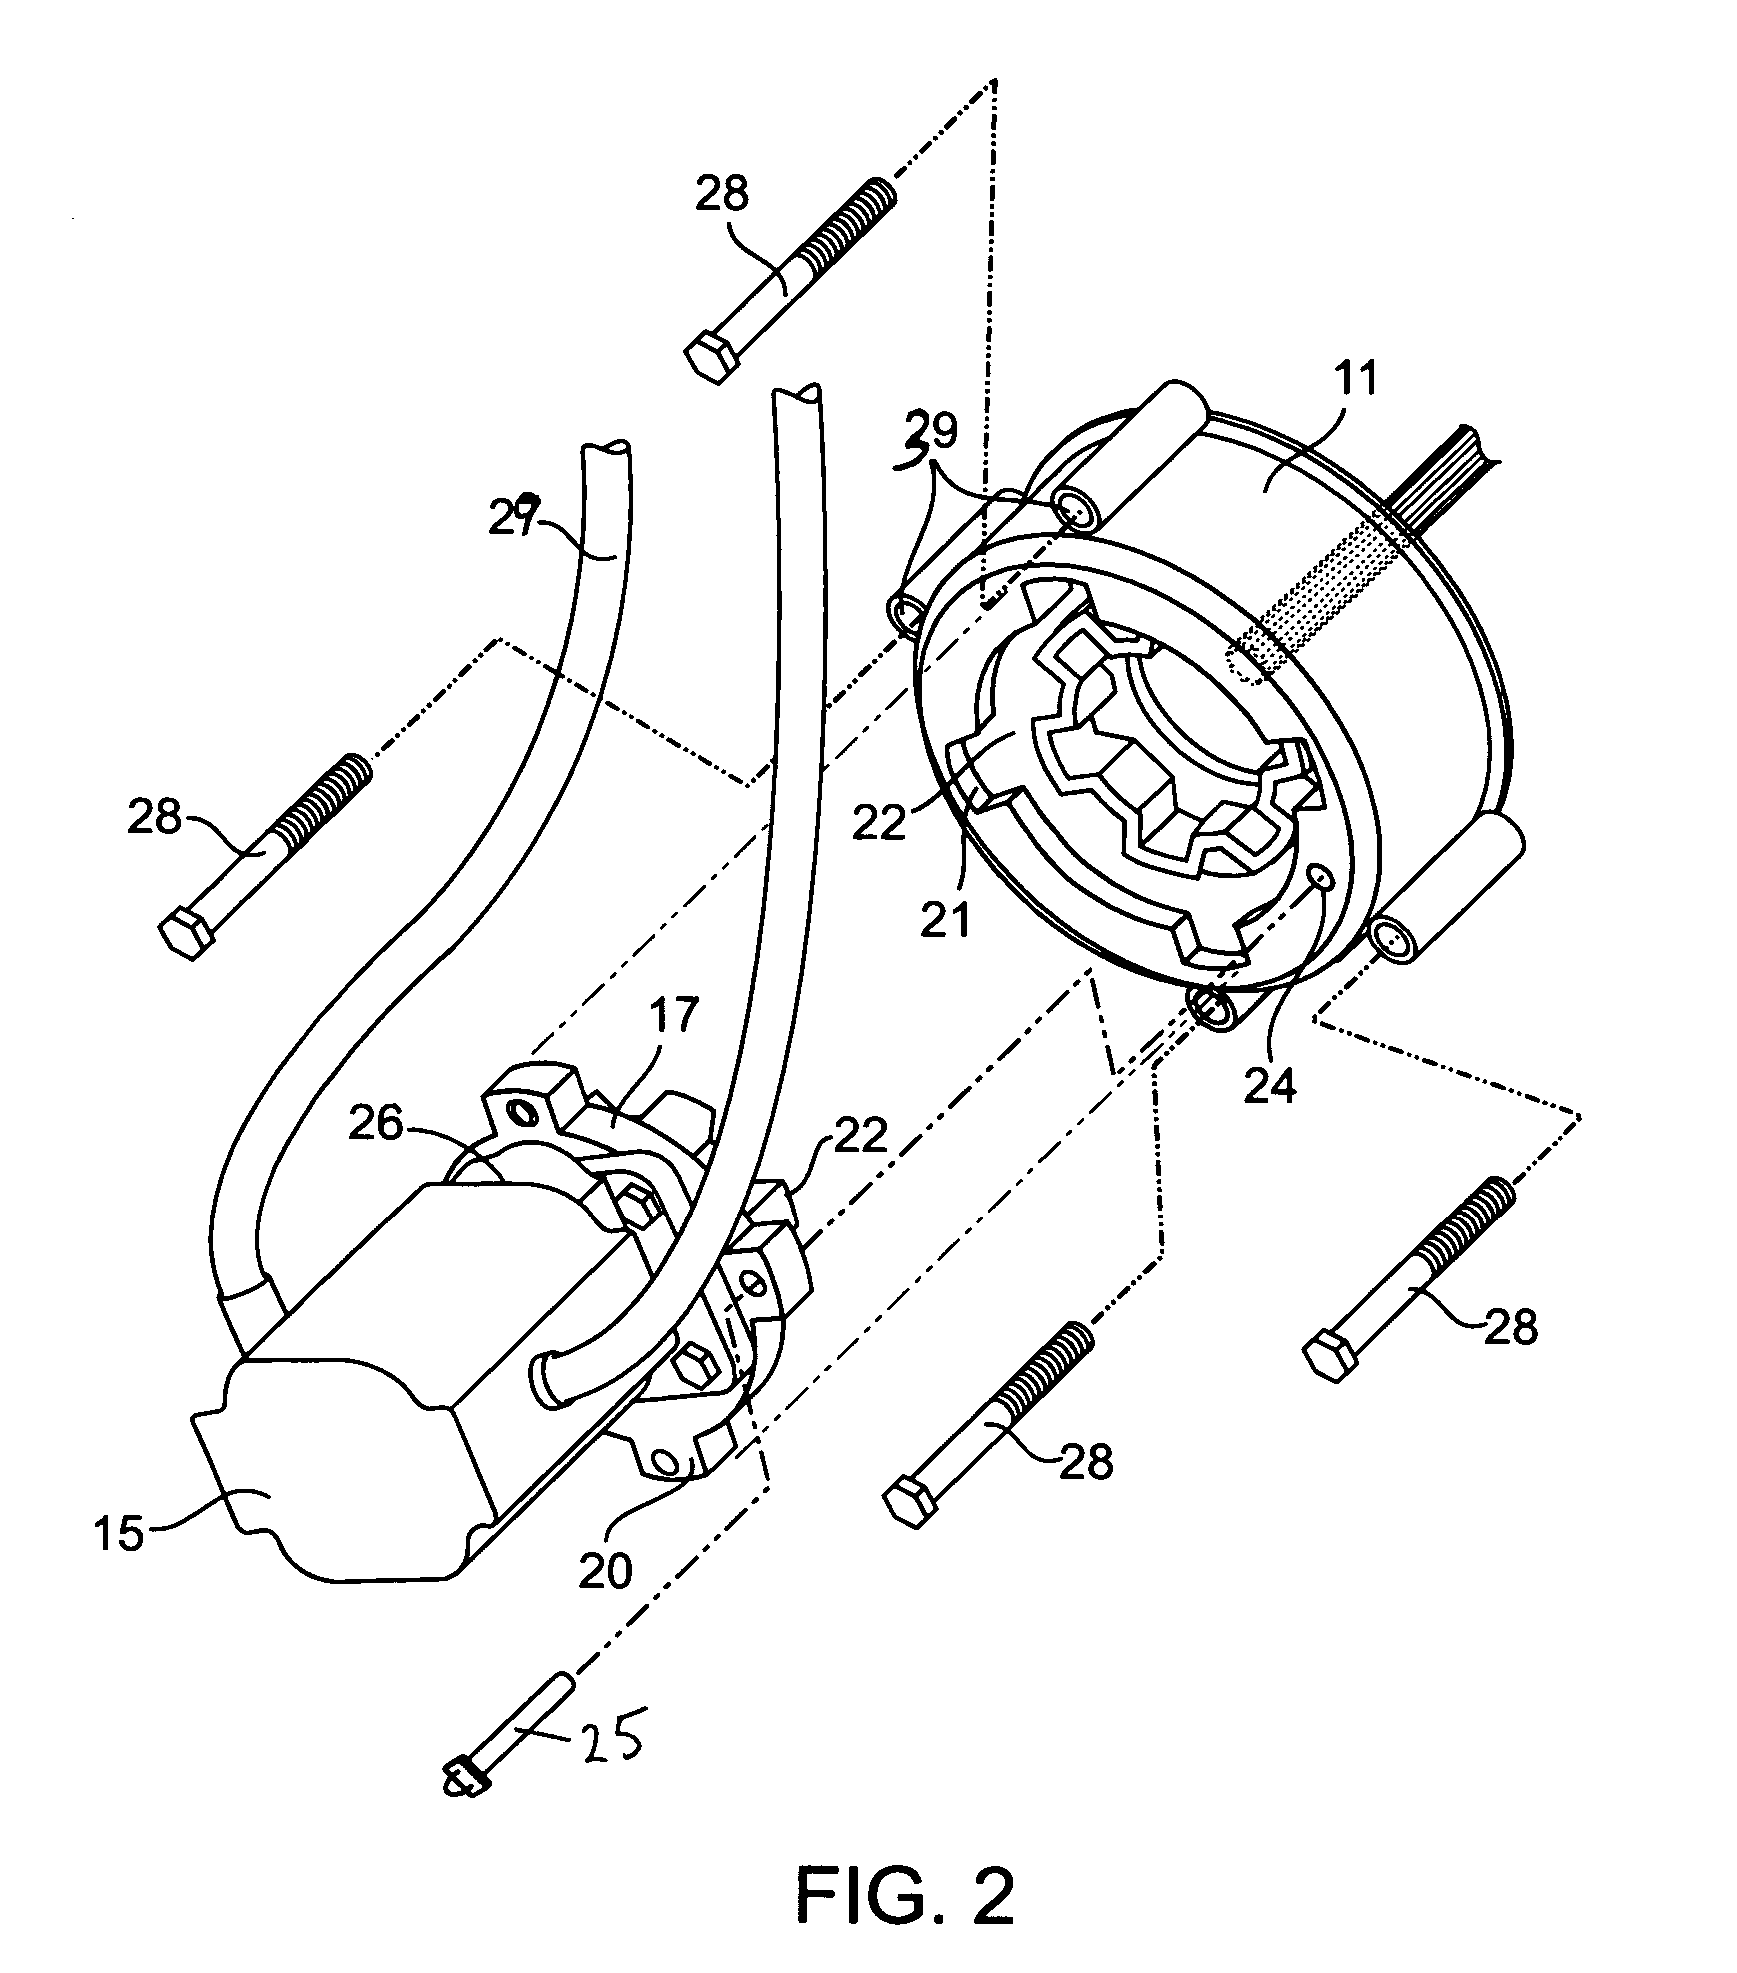 Quick connect assembly for ATV implements